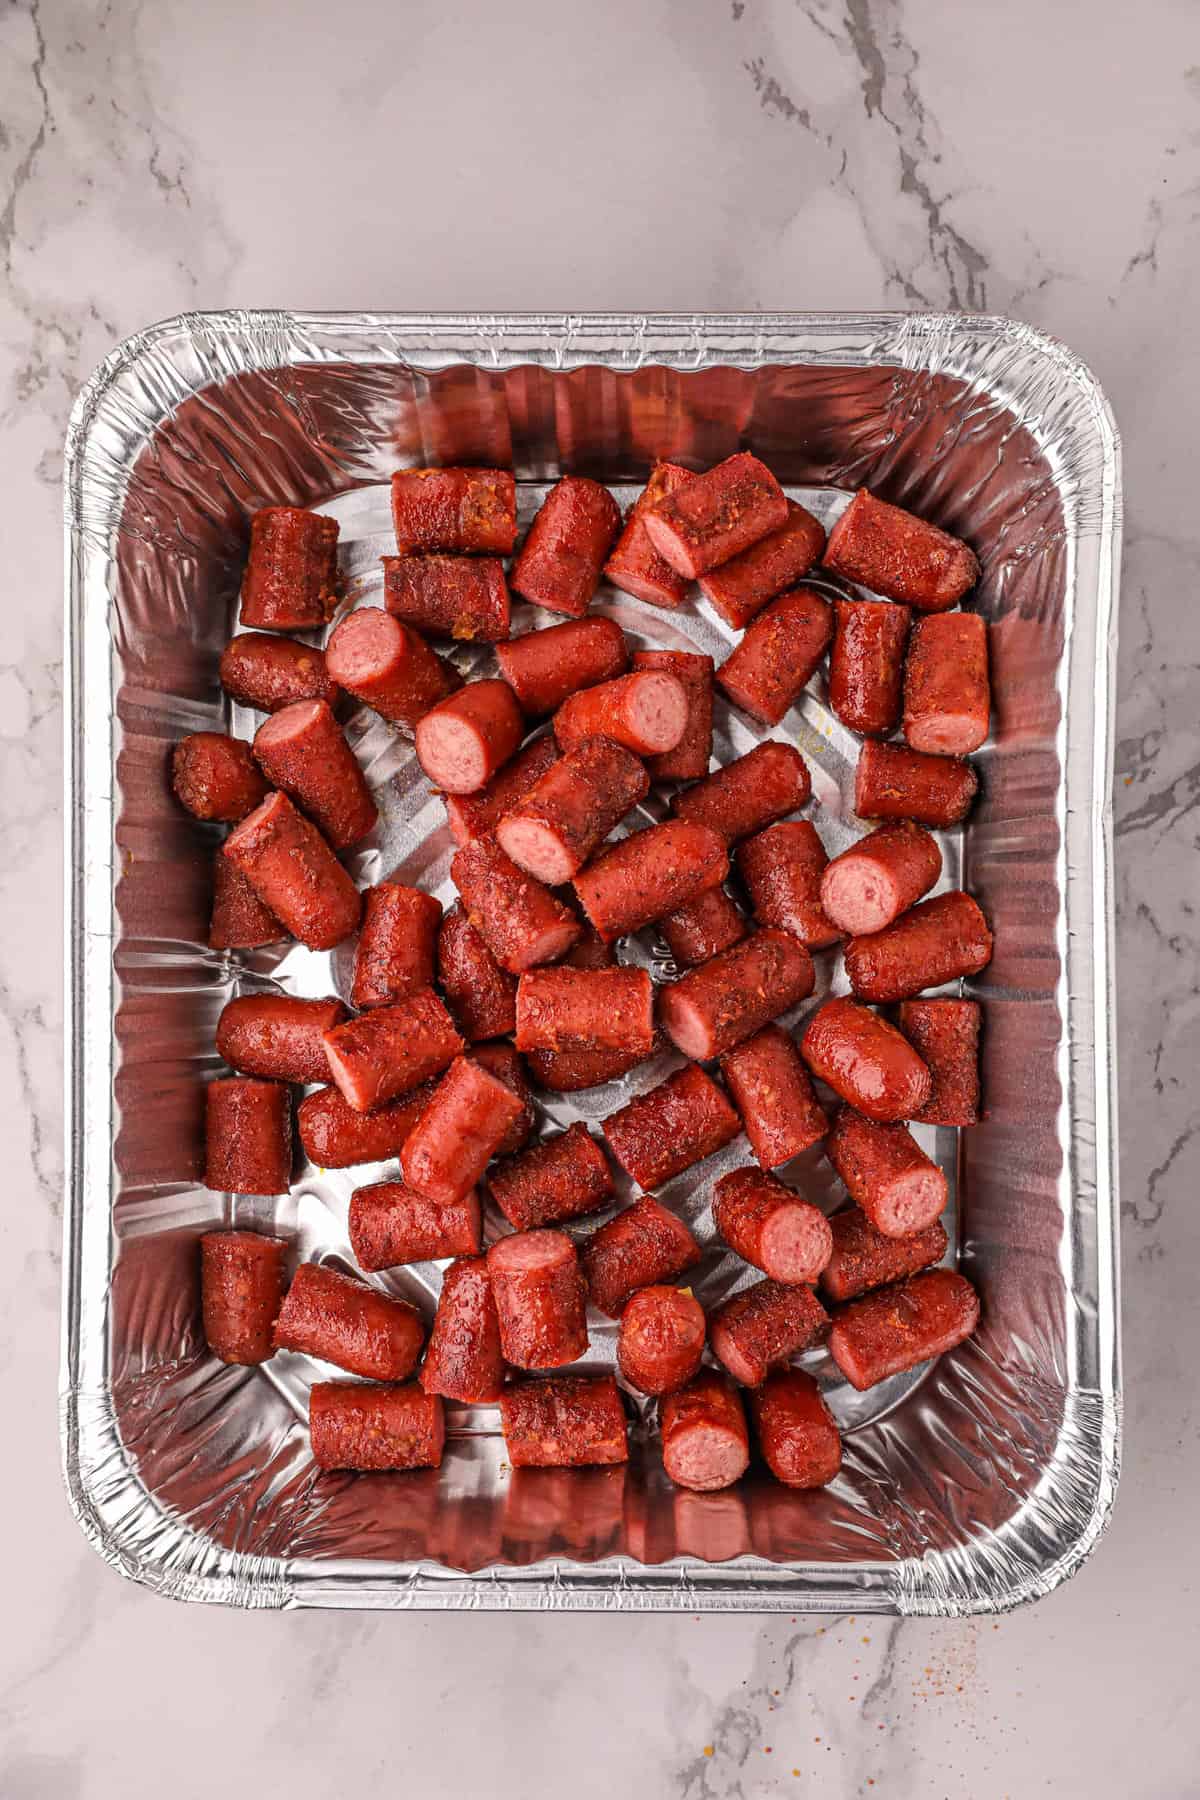 Slicing Smoked Hot Dogs and Placing in Disposible Pan